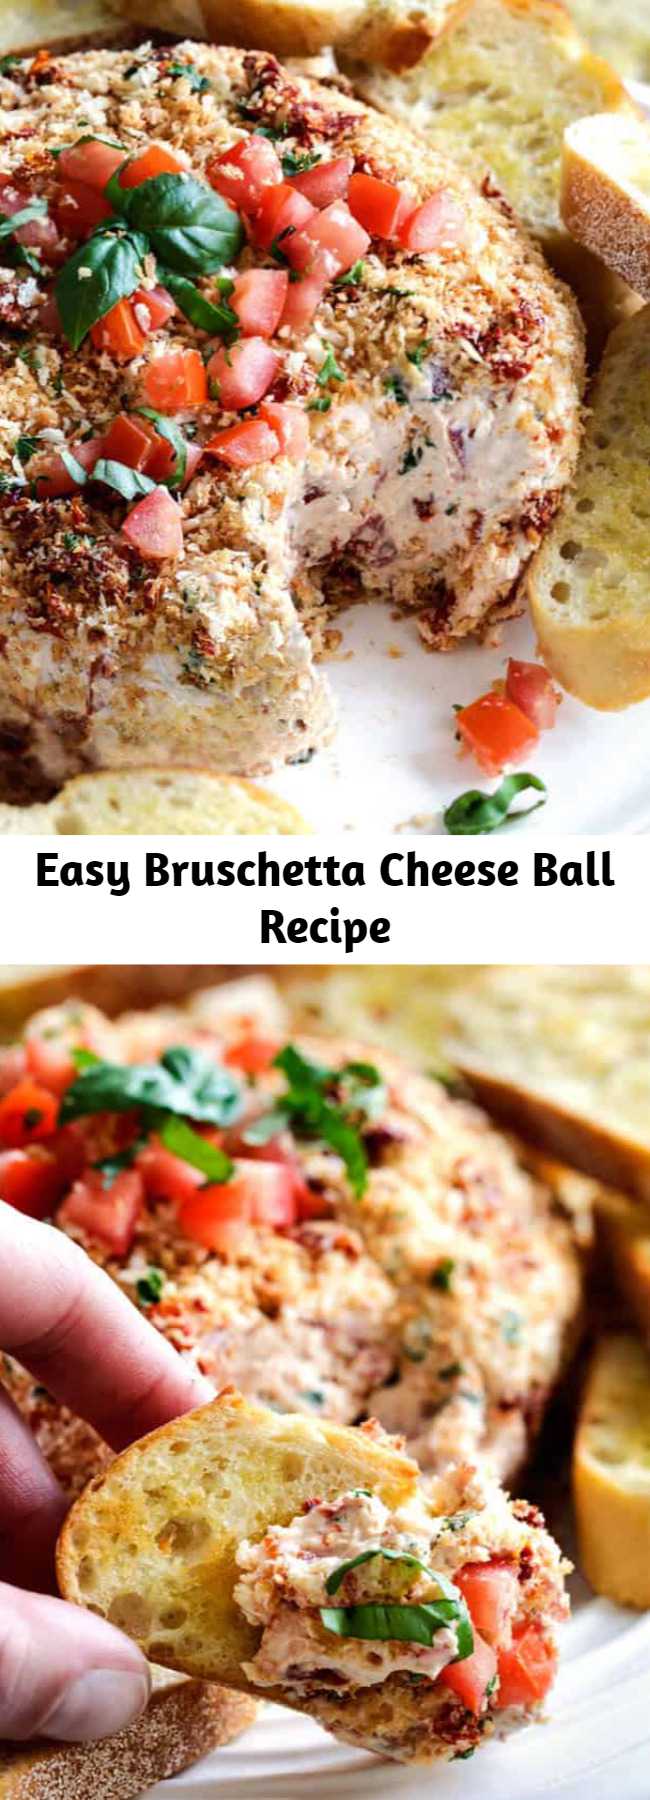 Easy Bruschetta Cheese Ball Recipe - Super easy Bruschetta Cheese Ball takes just minutes to whip up and is always a total show stopper, make ahead appetizer! #appetizer #cheeseball #bruschetta #thanksgivingrecipe #thanksgivingsides #holidaybaking #christmas #thanksgivingfood #thanksgiving #recipes #recipeoftheday #recipeseasy #easyrecipe #appetizers